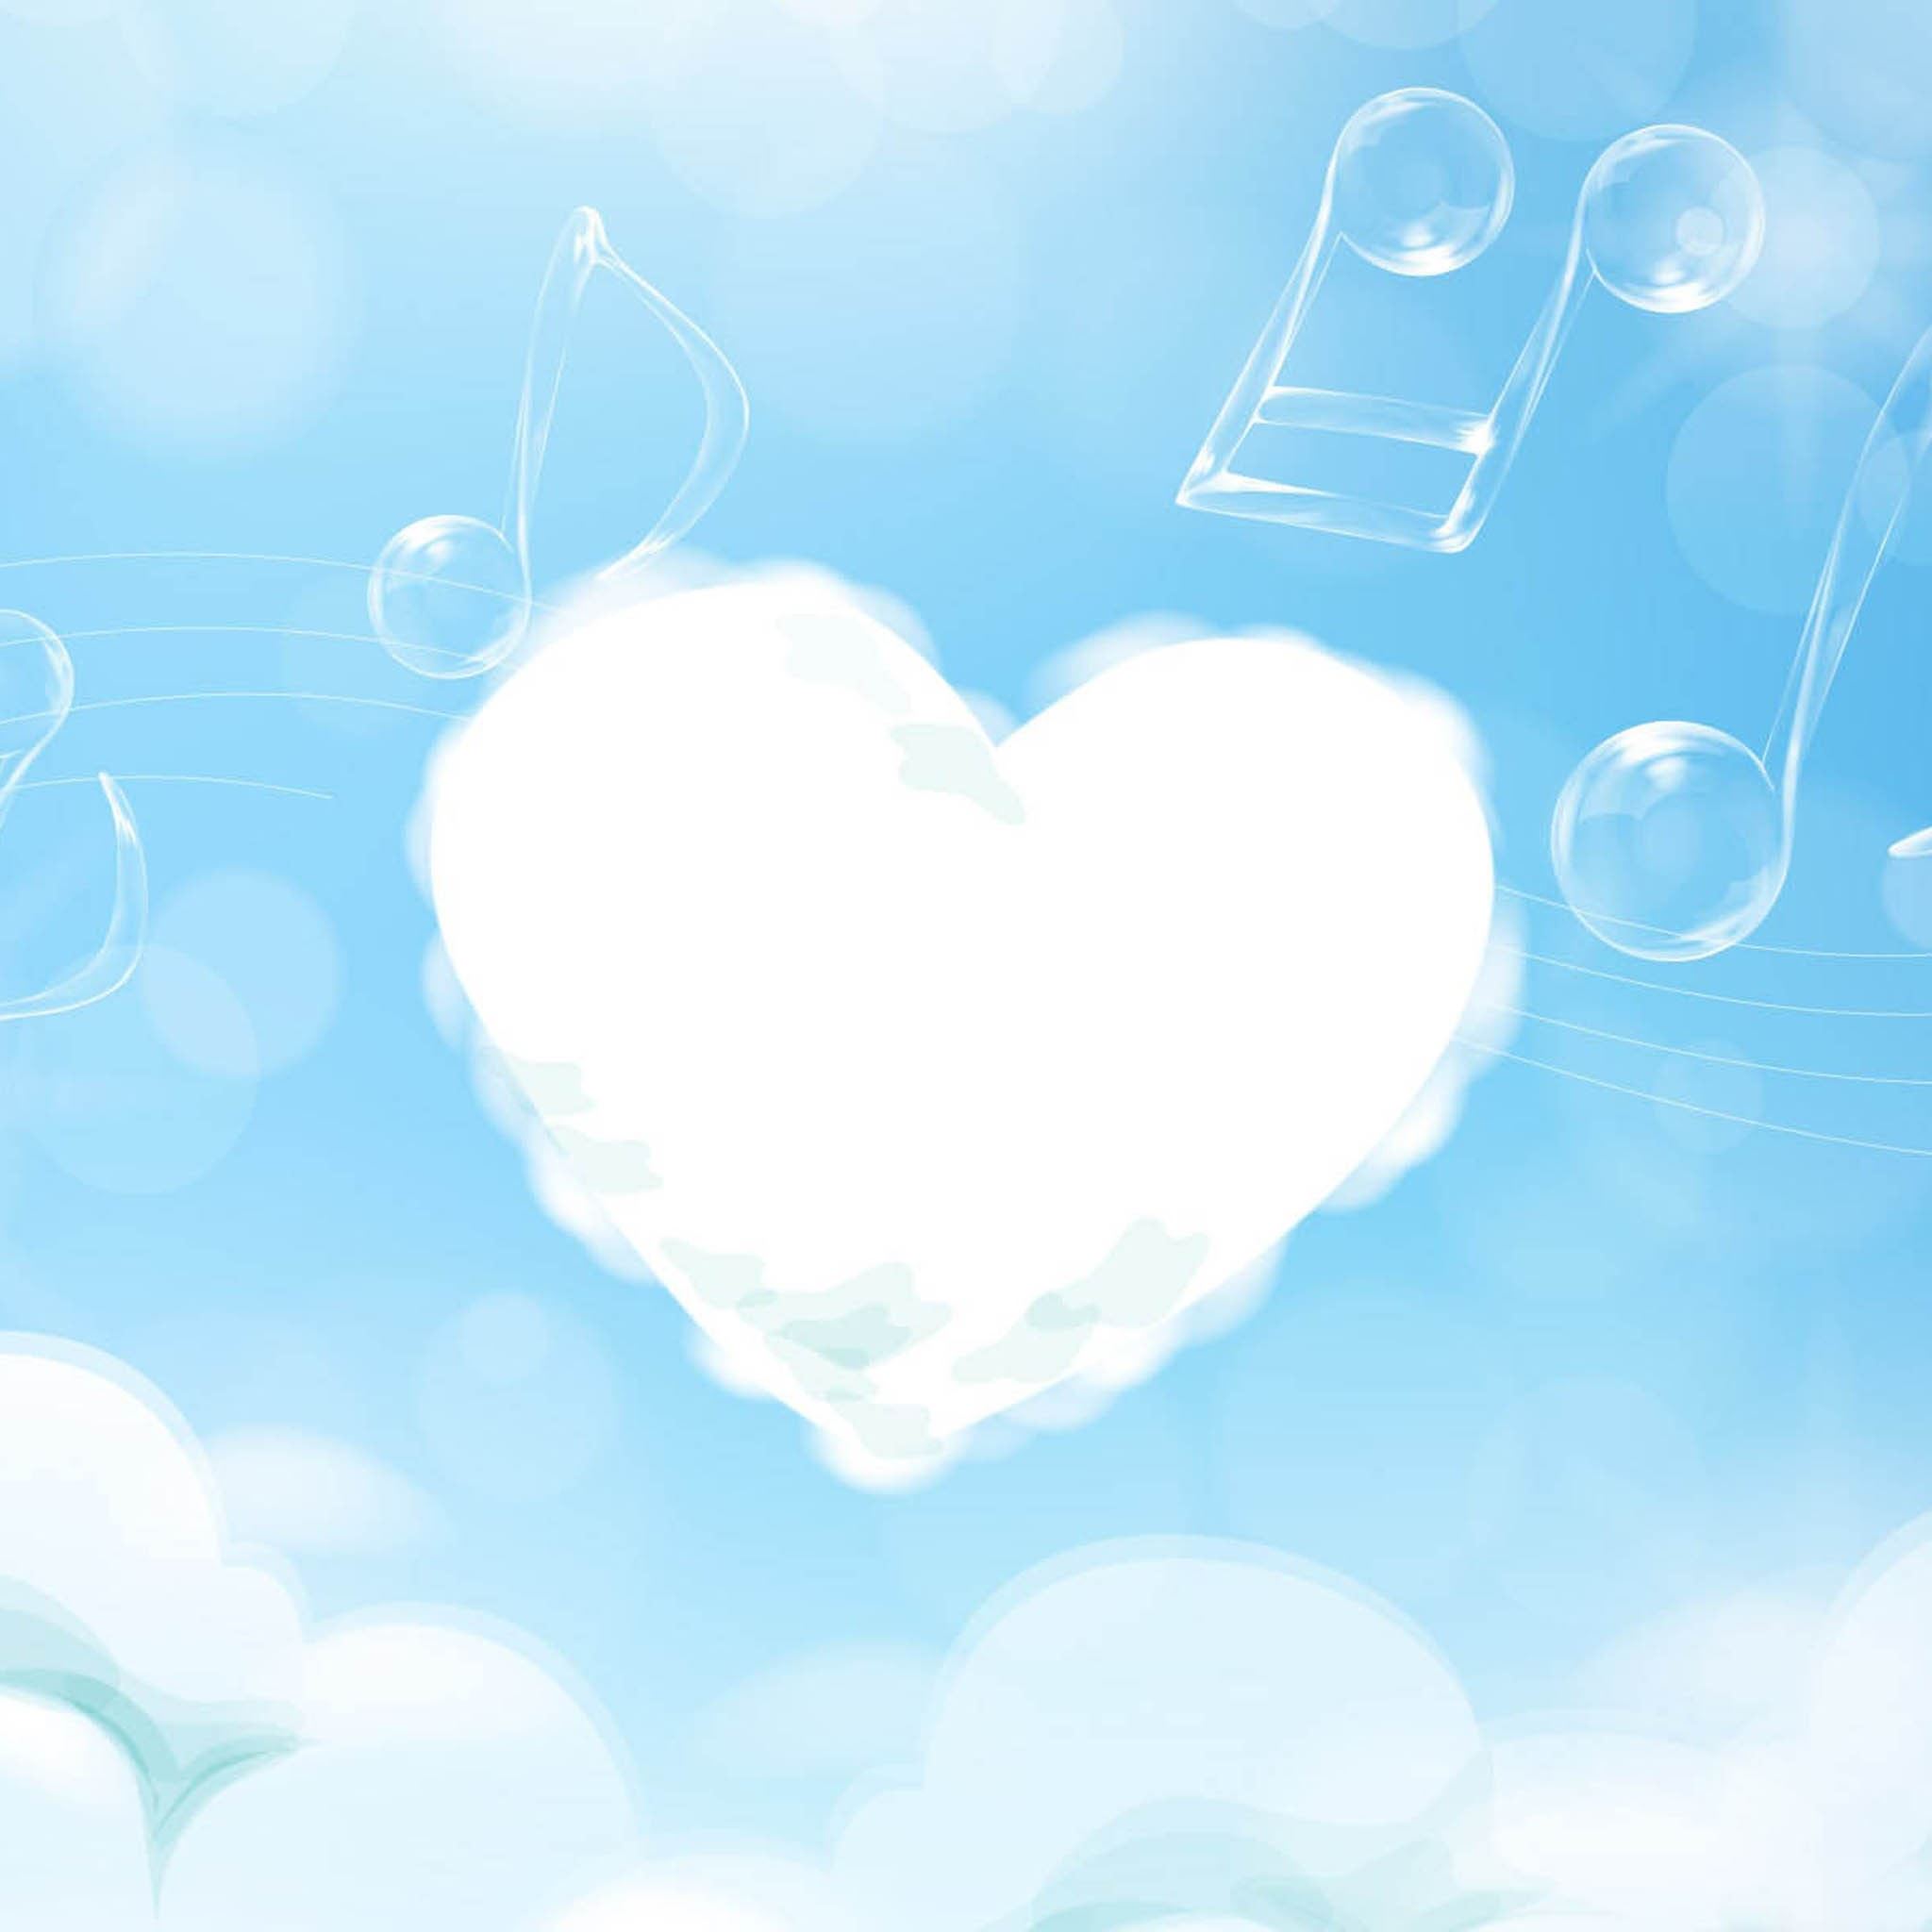 Love Is In The Sky Ipad Air Wallpapers Free Download